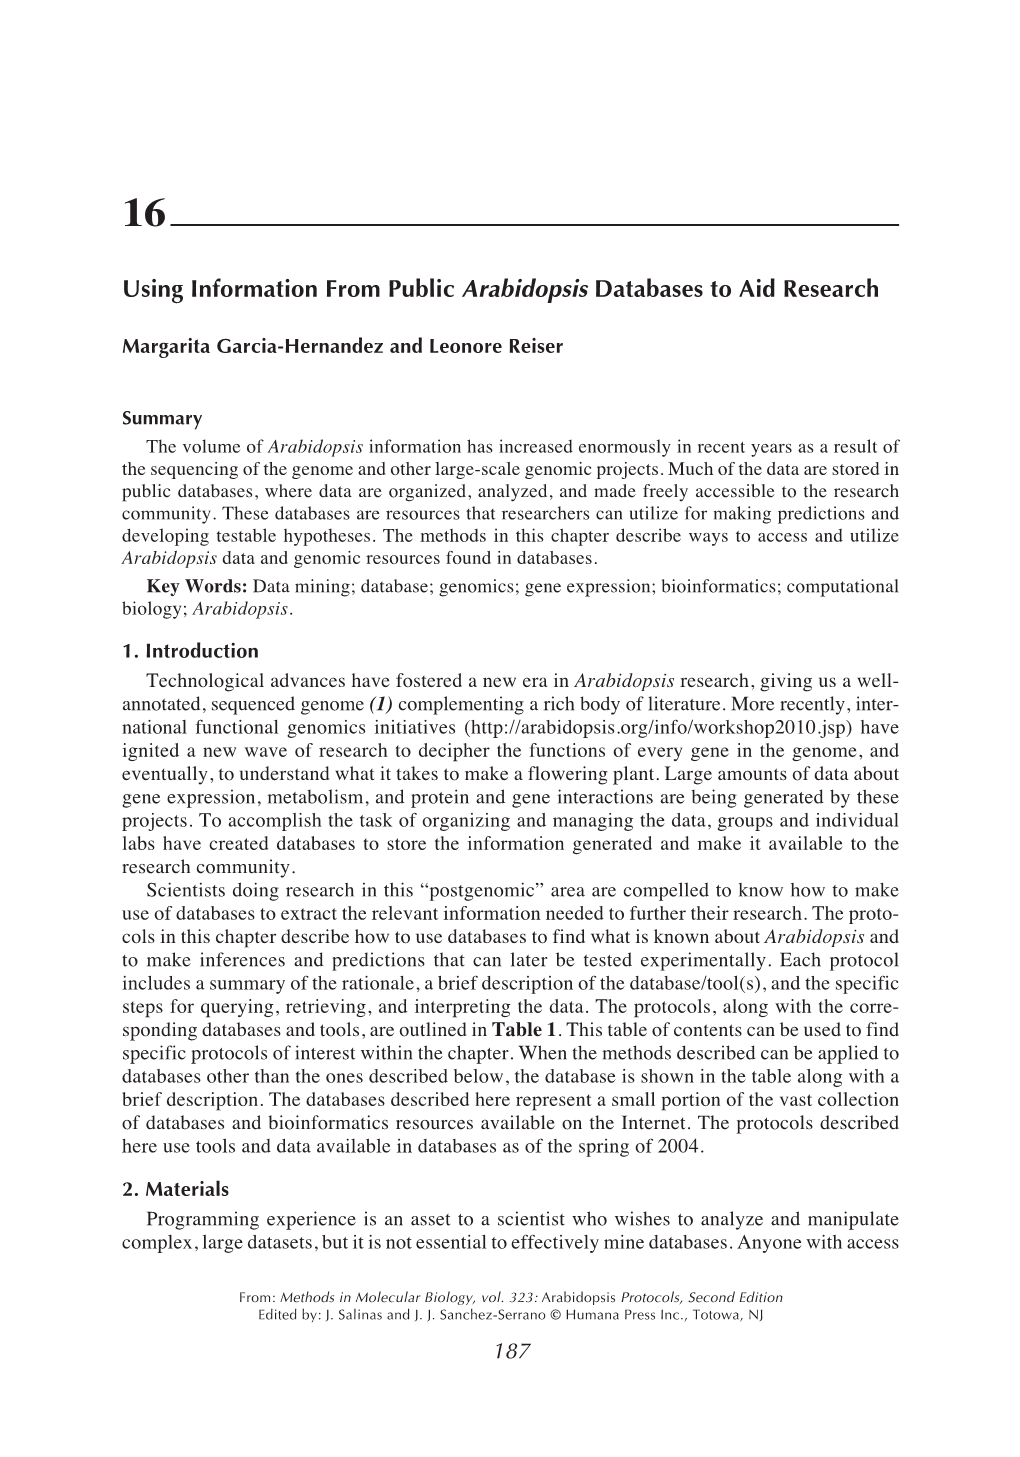 Using Information from Public Arabidopsis Databases to Aid Research